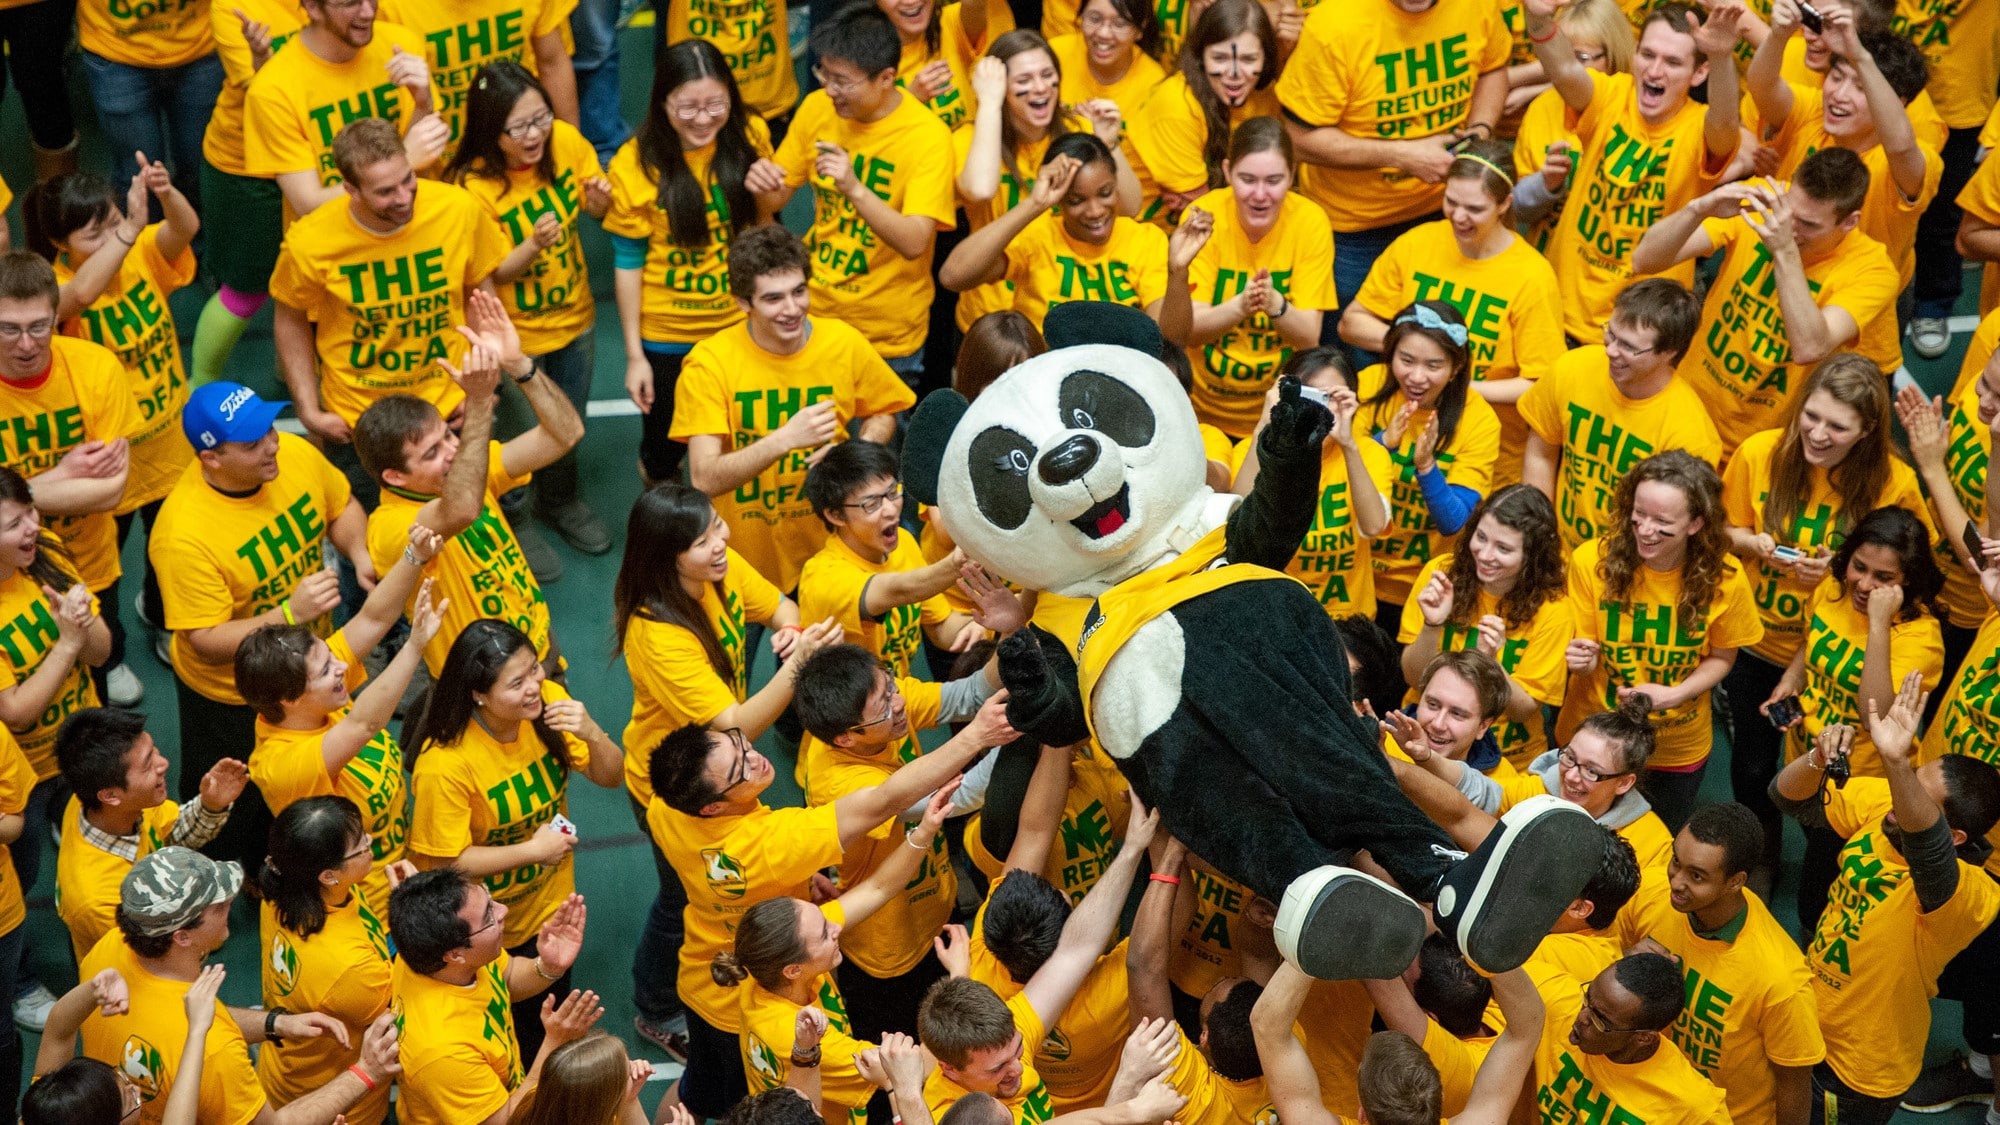 Patches the mascot crowd surfing over students wearing Green and Gold after a dodgeball game